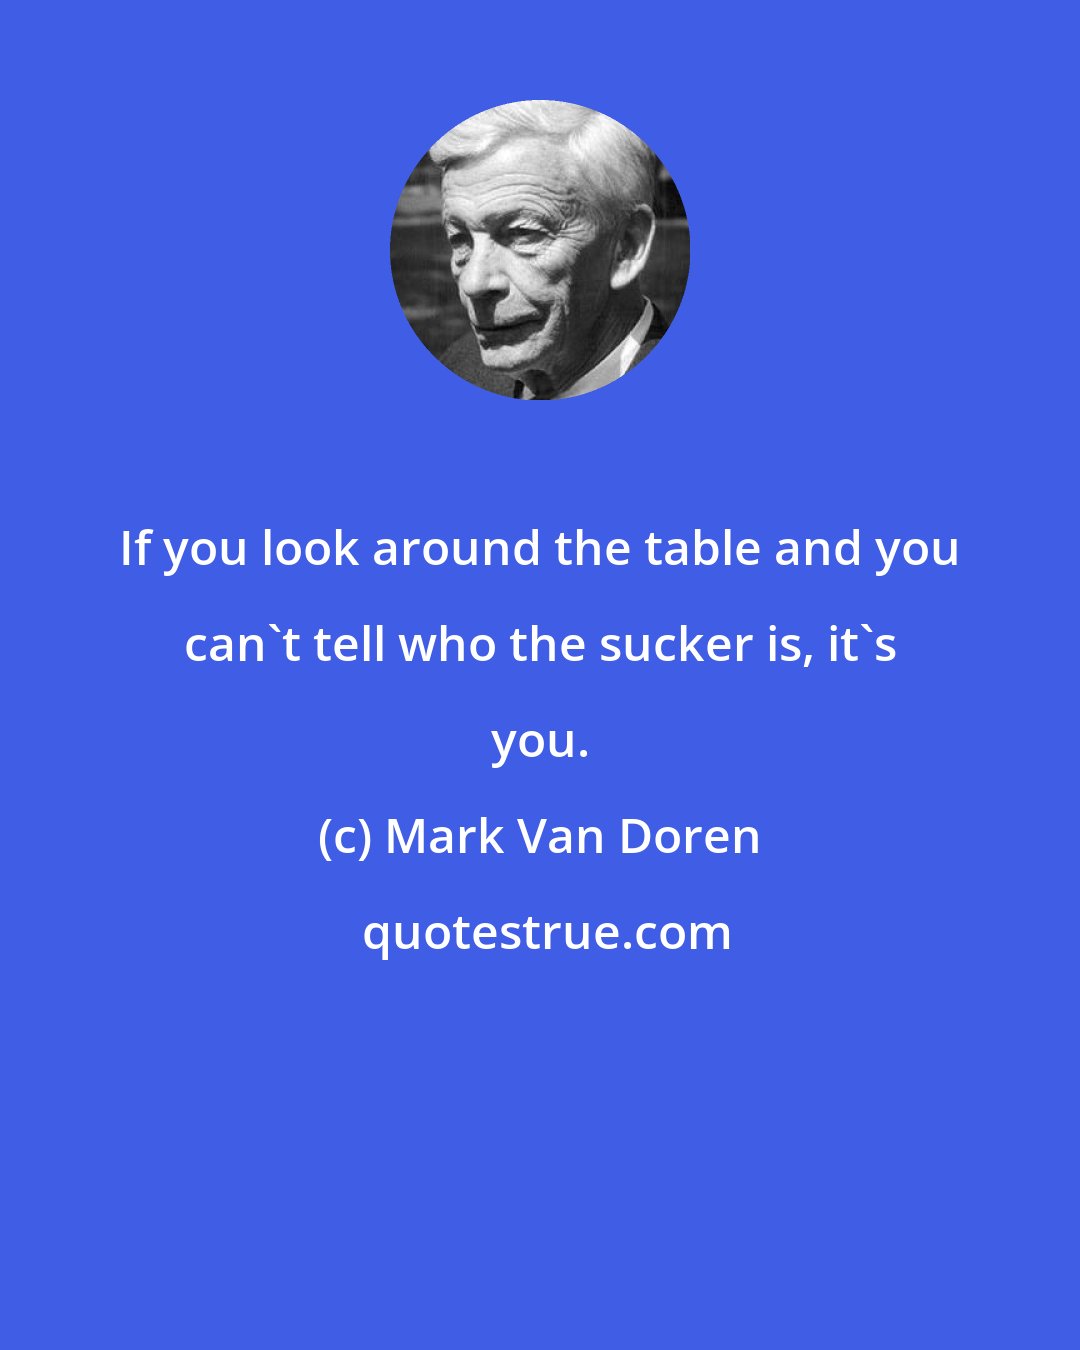 Mark Van Doren: If you look around the table and you can't tell who the sucker is, it's you.